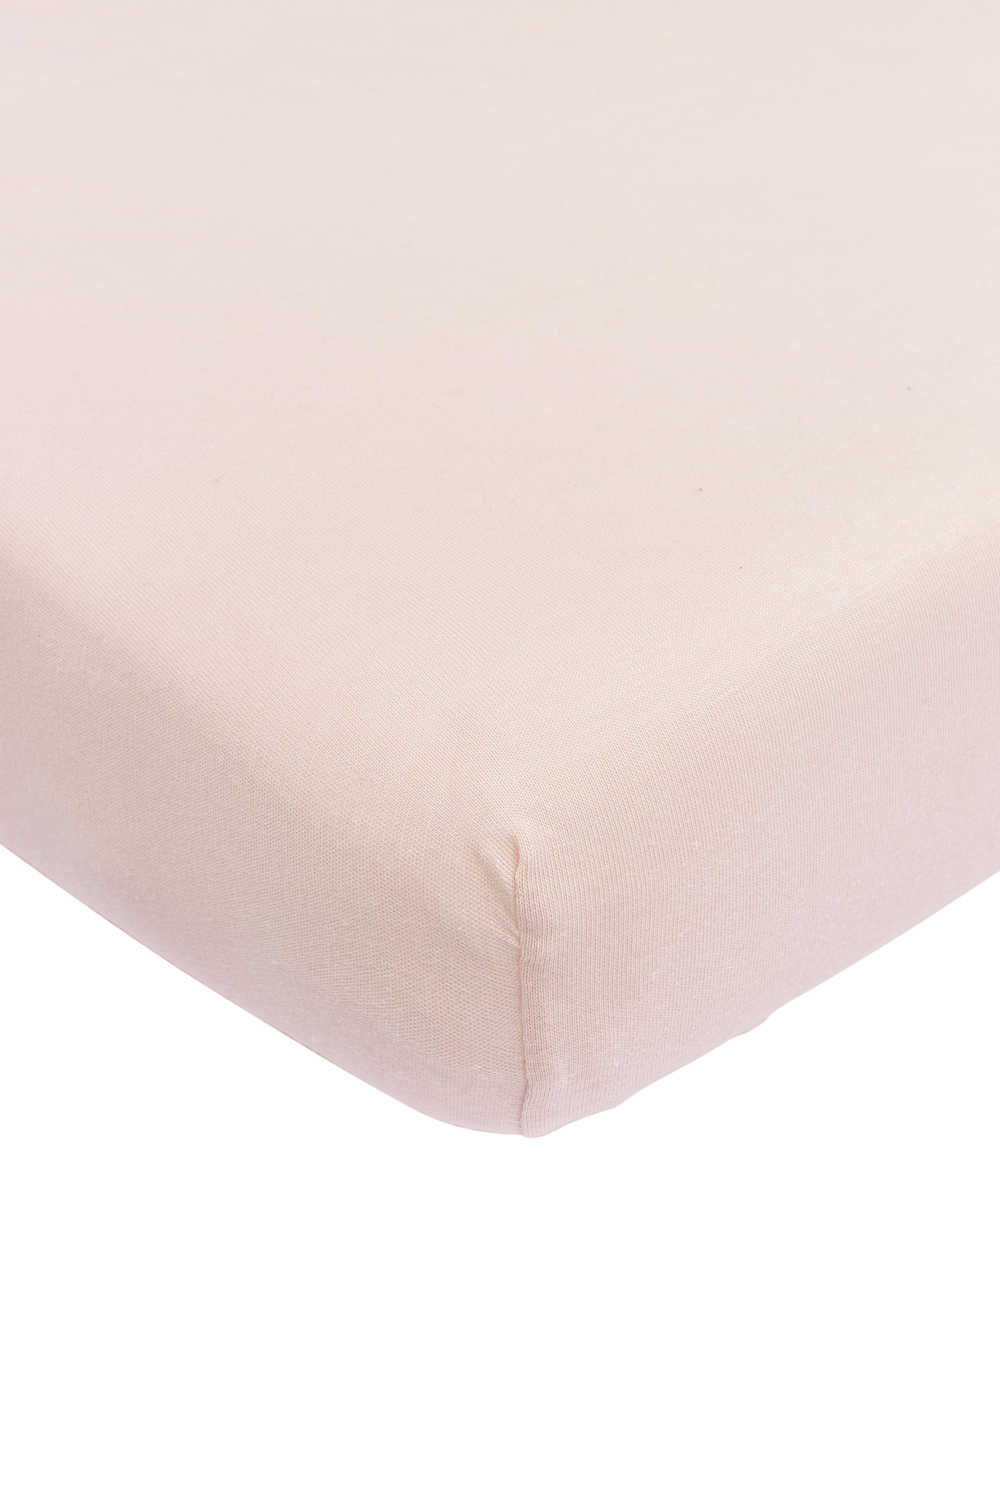 Jersey Fitted Sheet - Soft Pink - 70x140/150cm